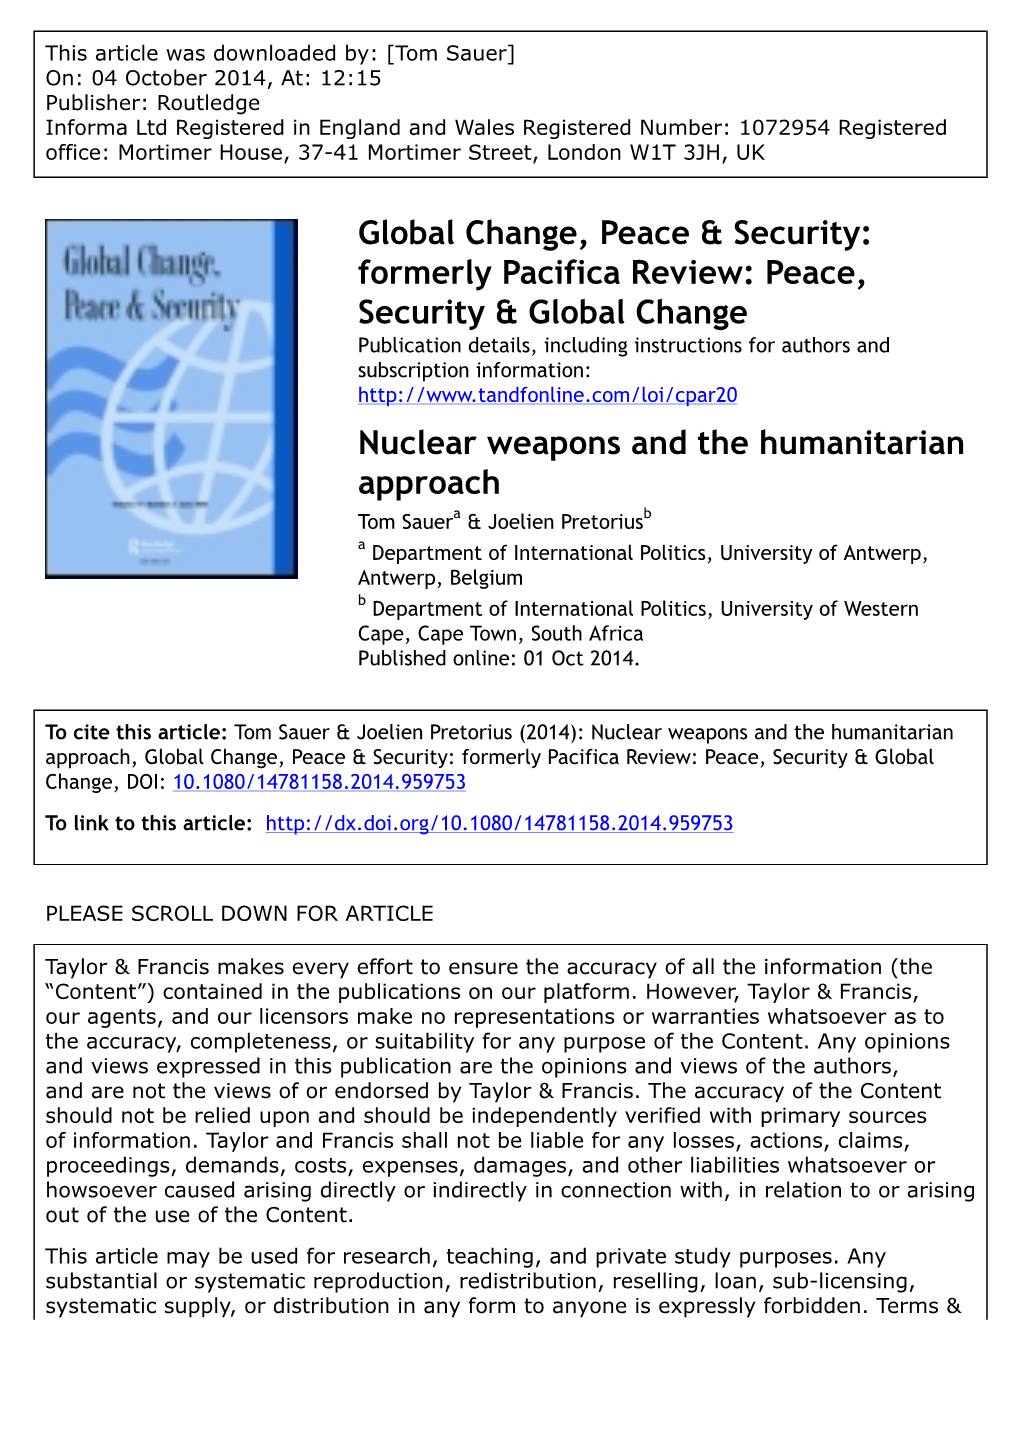 Nuclear Weapons and the Humanitarian Approach